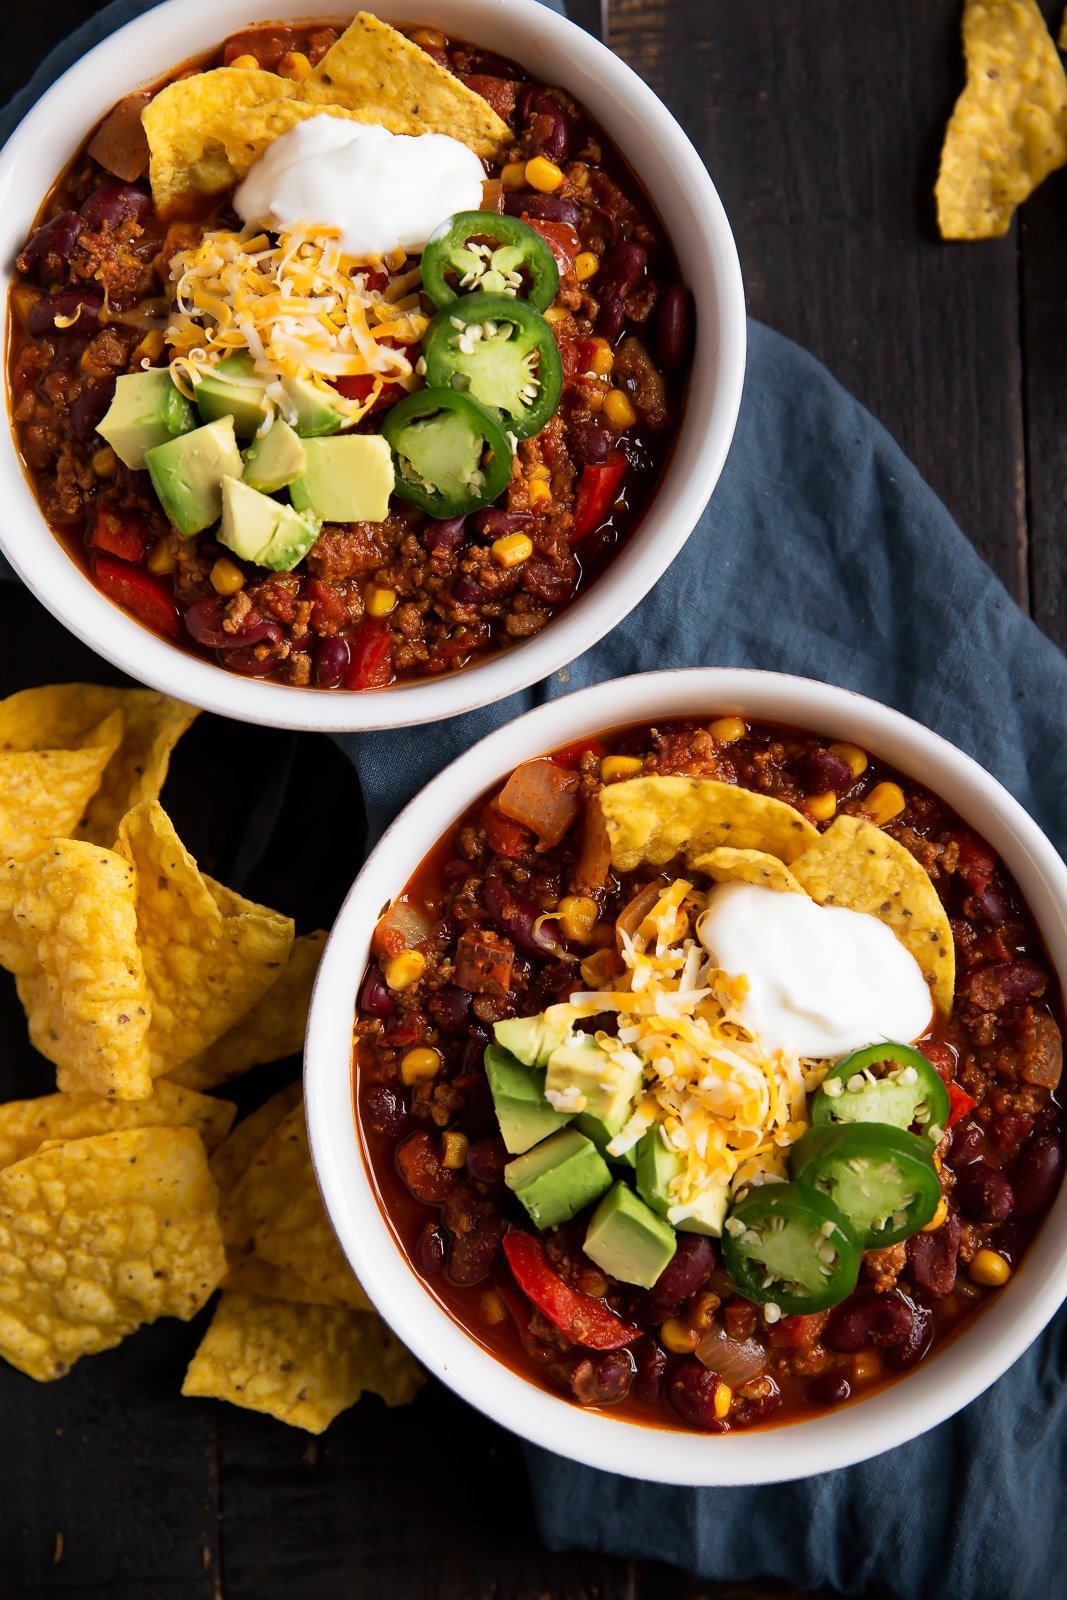 Seriously, The Best Healthy Turkey Chili from ambitiouskitchen.com on foodiecrush.com